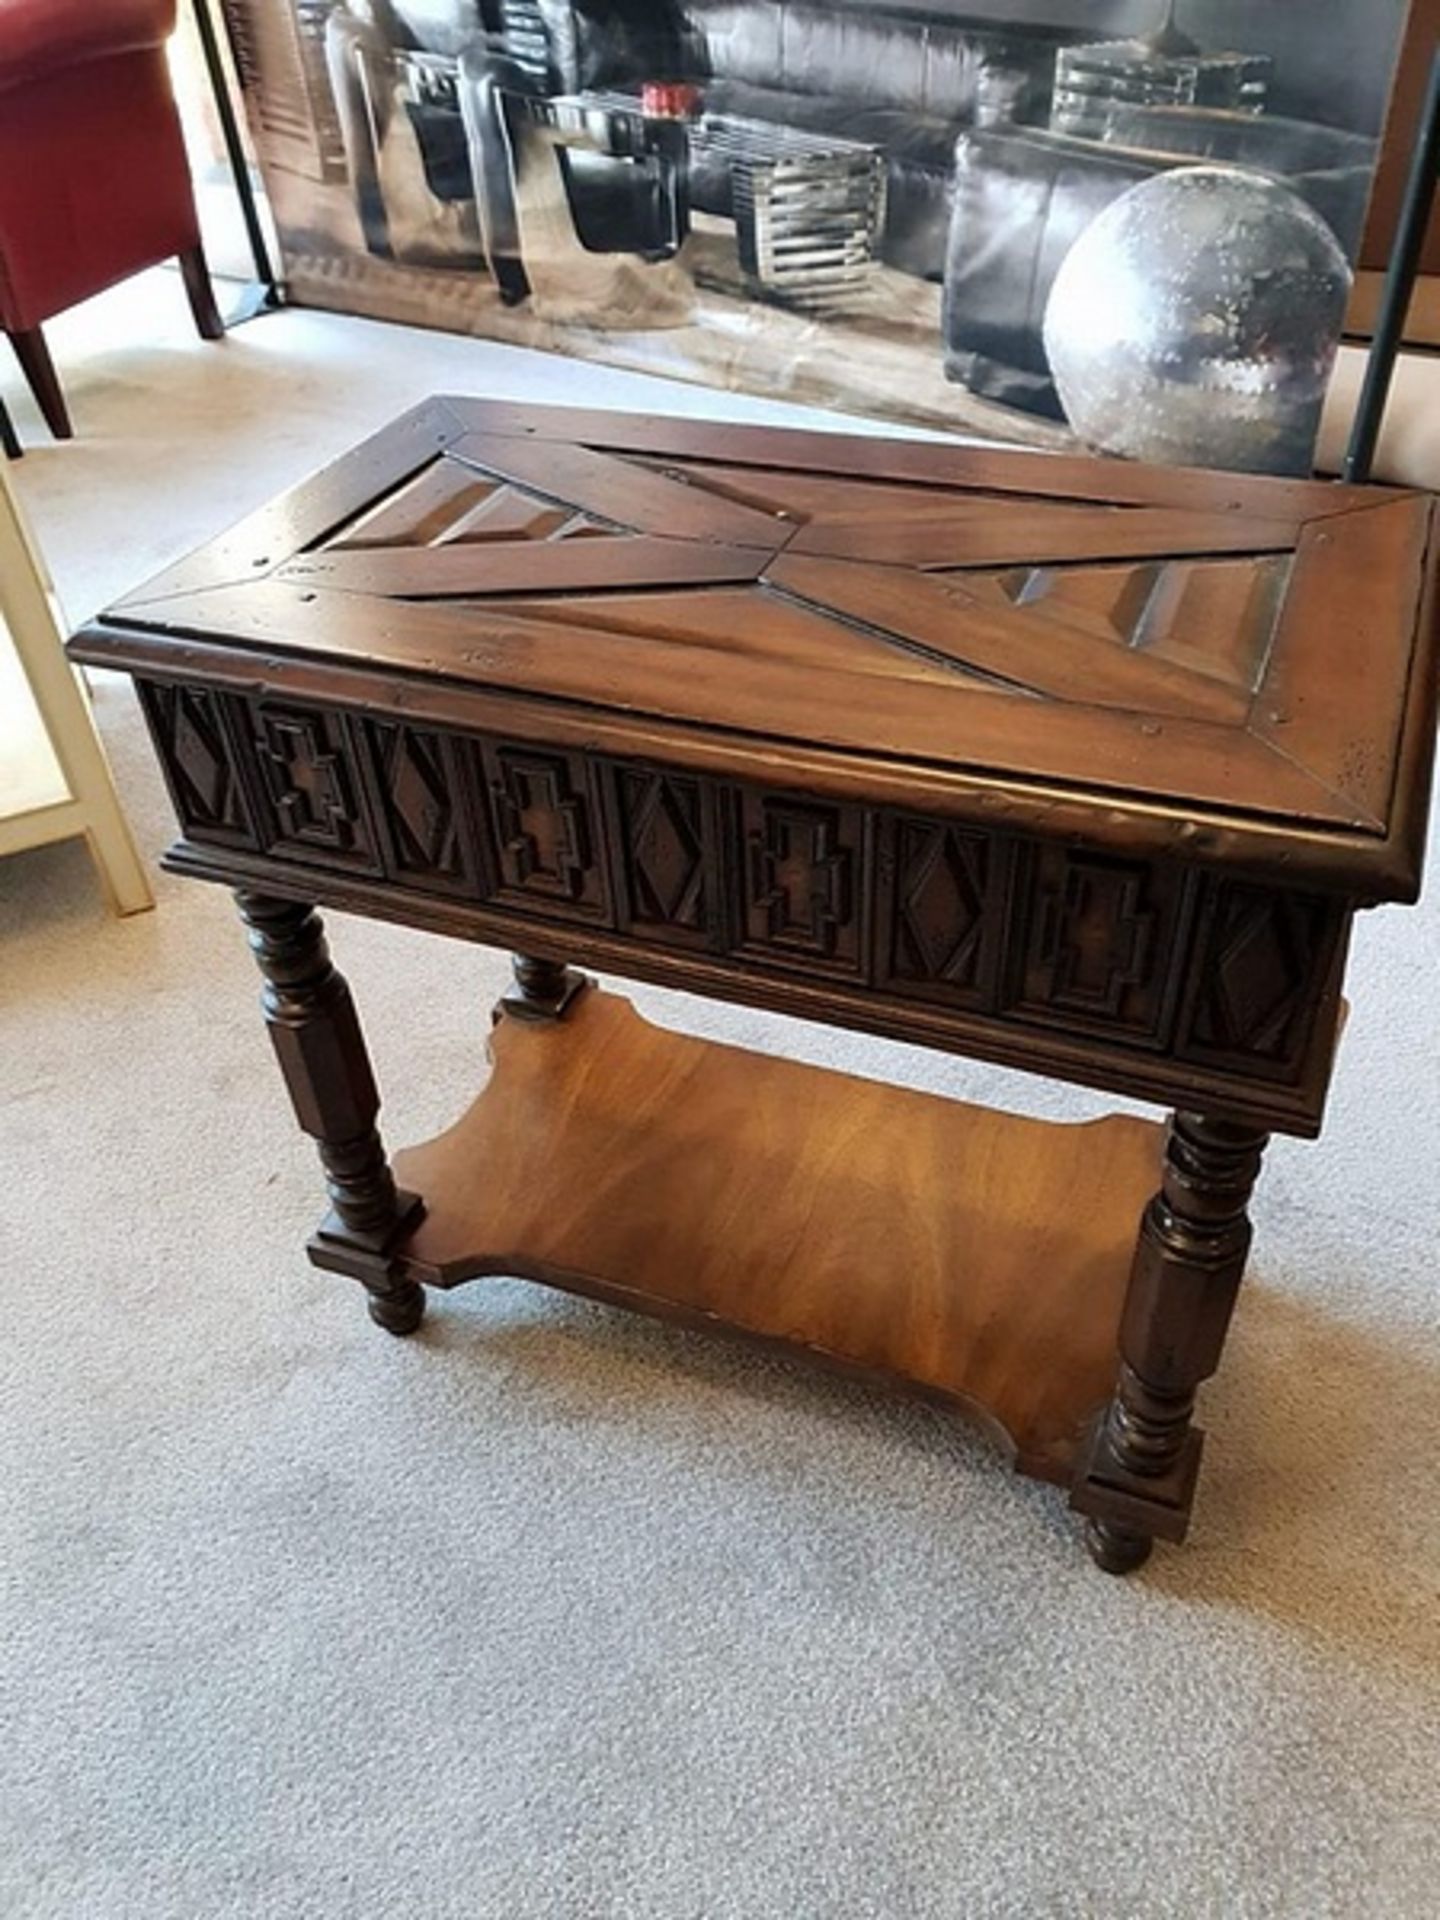 Century Furniture Jacobean Side Table A Stunning Reproduction Jacobean Side Table Features A Planked